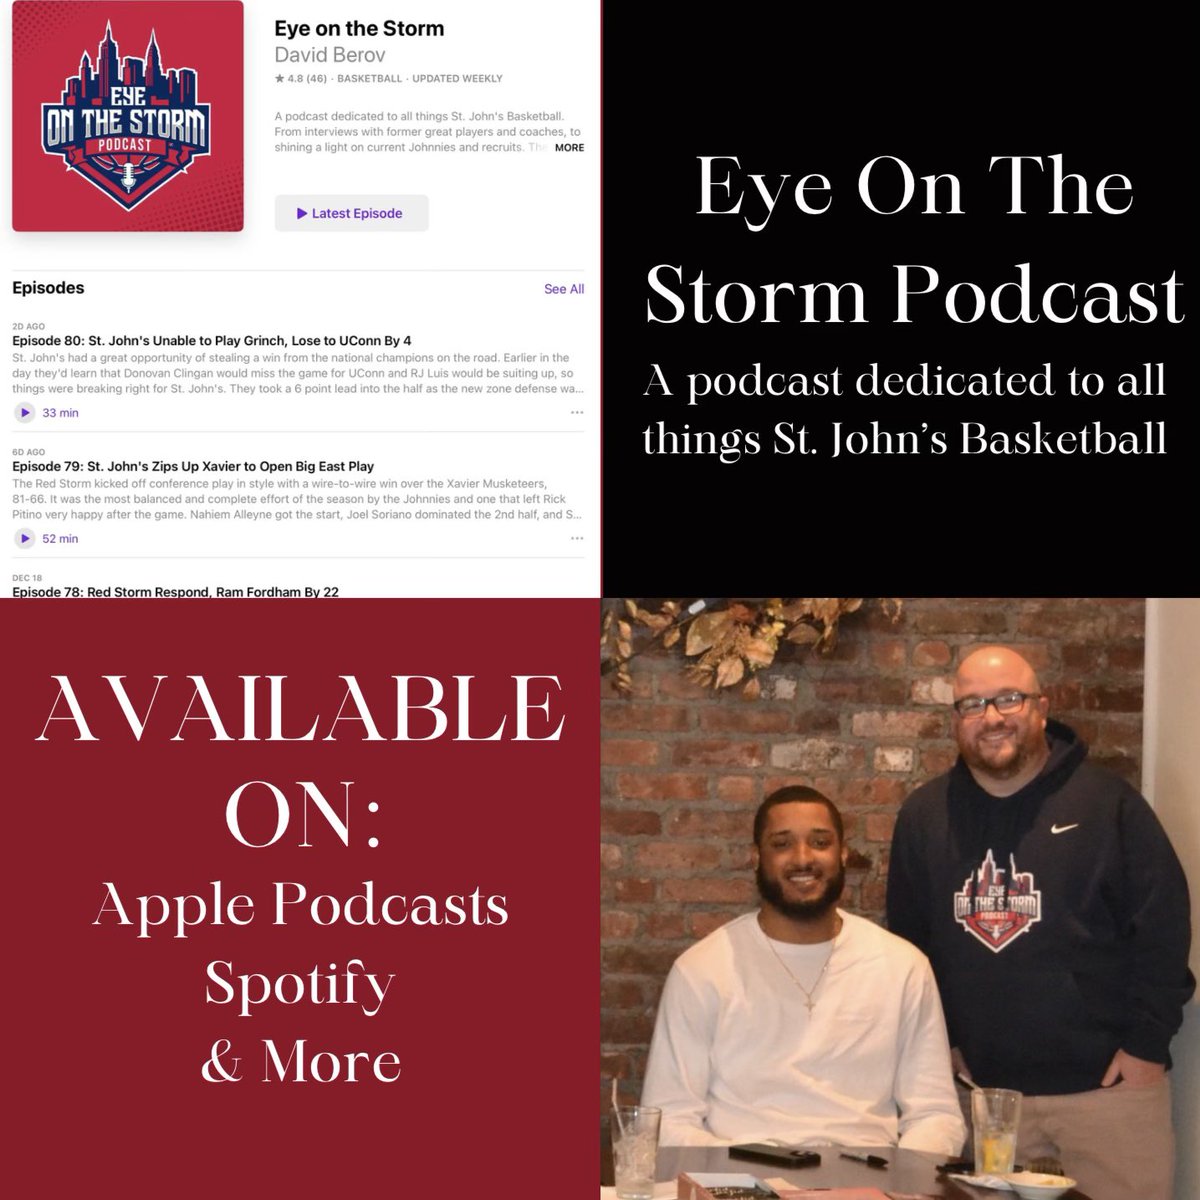 Calling all St. John's Basketball fans!   From interviews with former players and staff to game previews, recaps and reactions, tune in to the Eye on the Storm Podcast for the most up to date @stjohnsbball news. #sjubb @davee_8 @eyeonstormpod @stormmarketing4